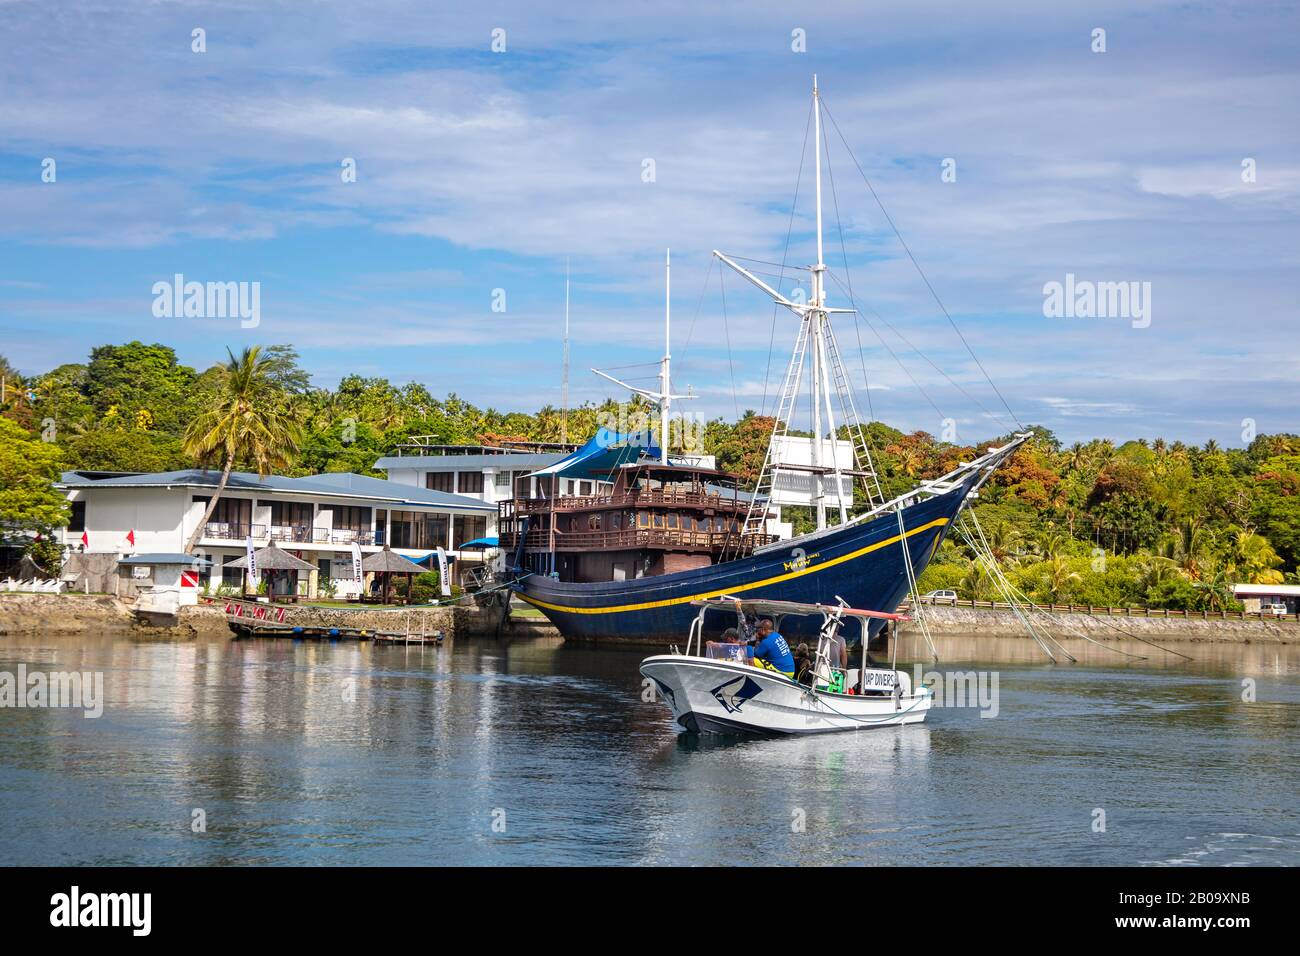 A view from the water of the Manta Ray Bay Resort and it's floating restaurant 'The Mnuw' on the island of Yap, Micronesia. Stock Photo